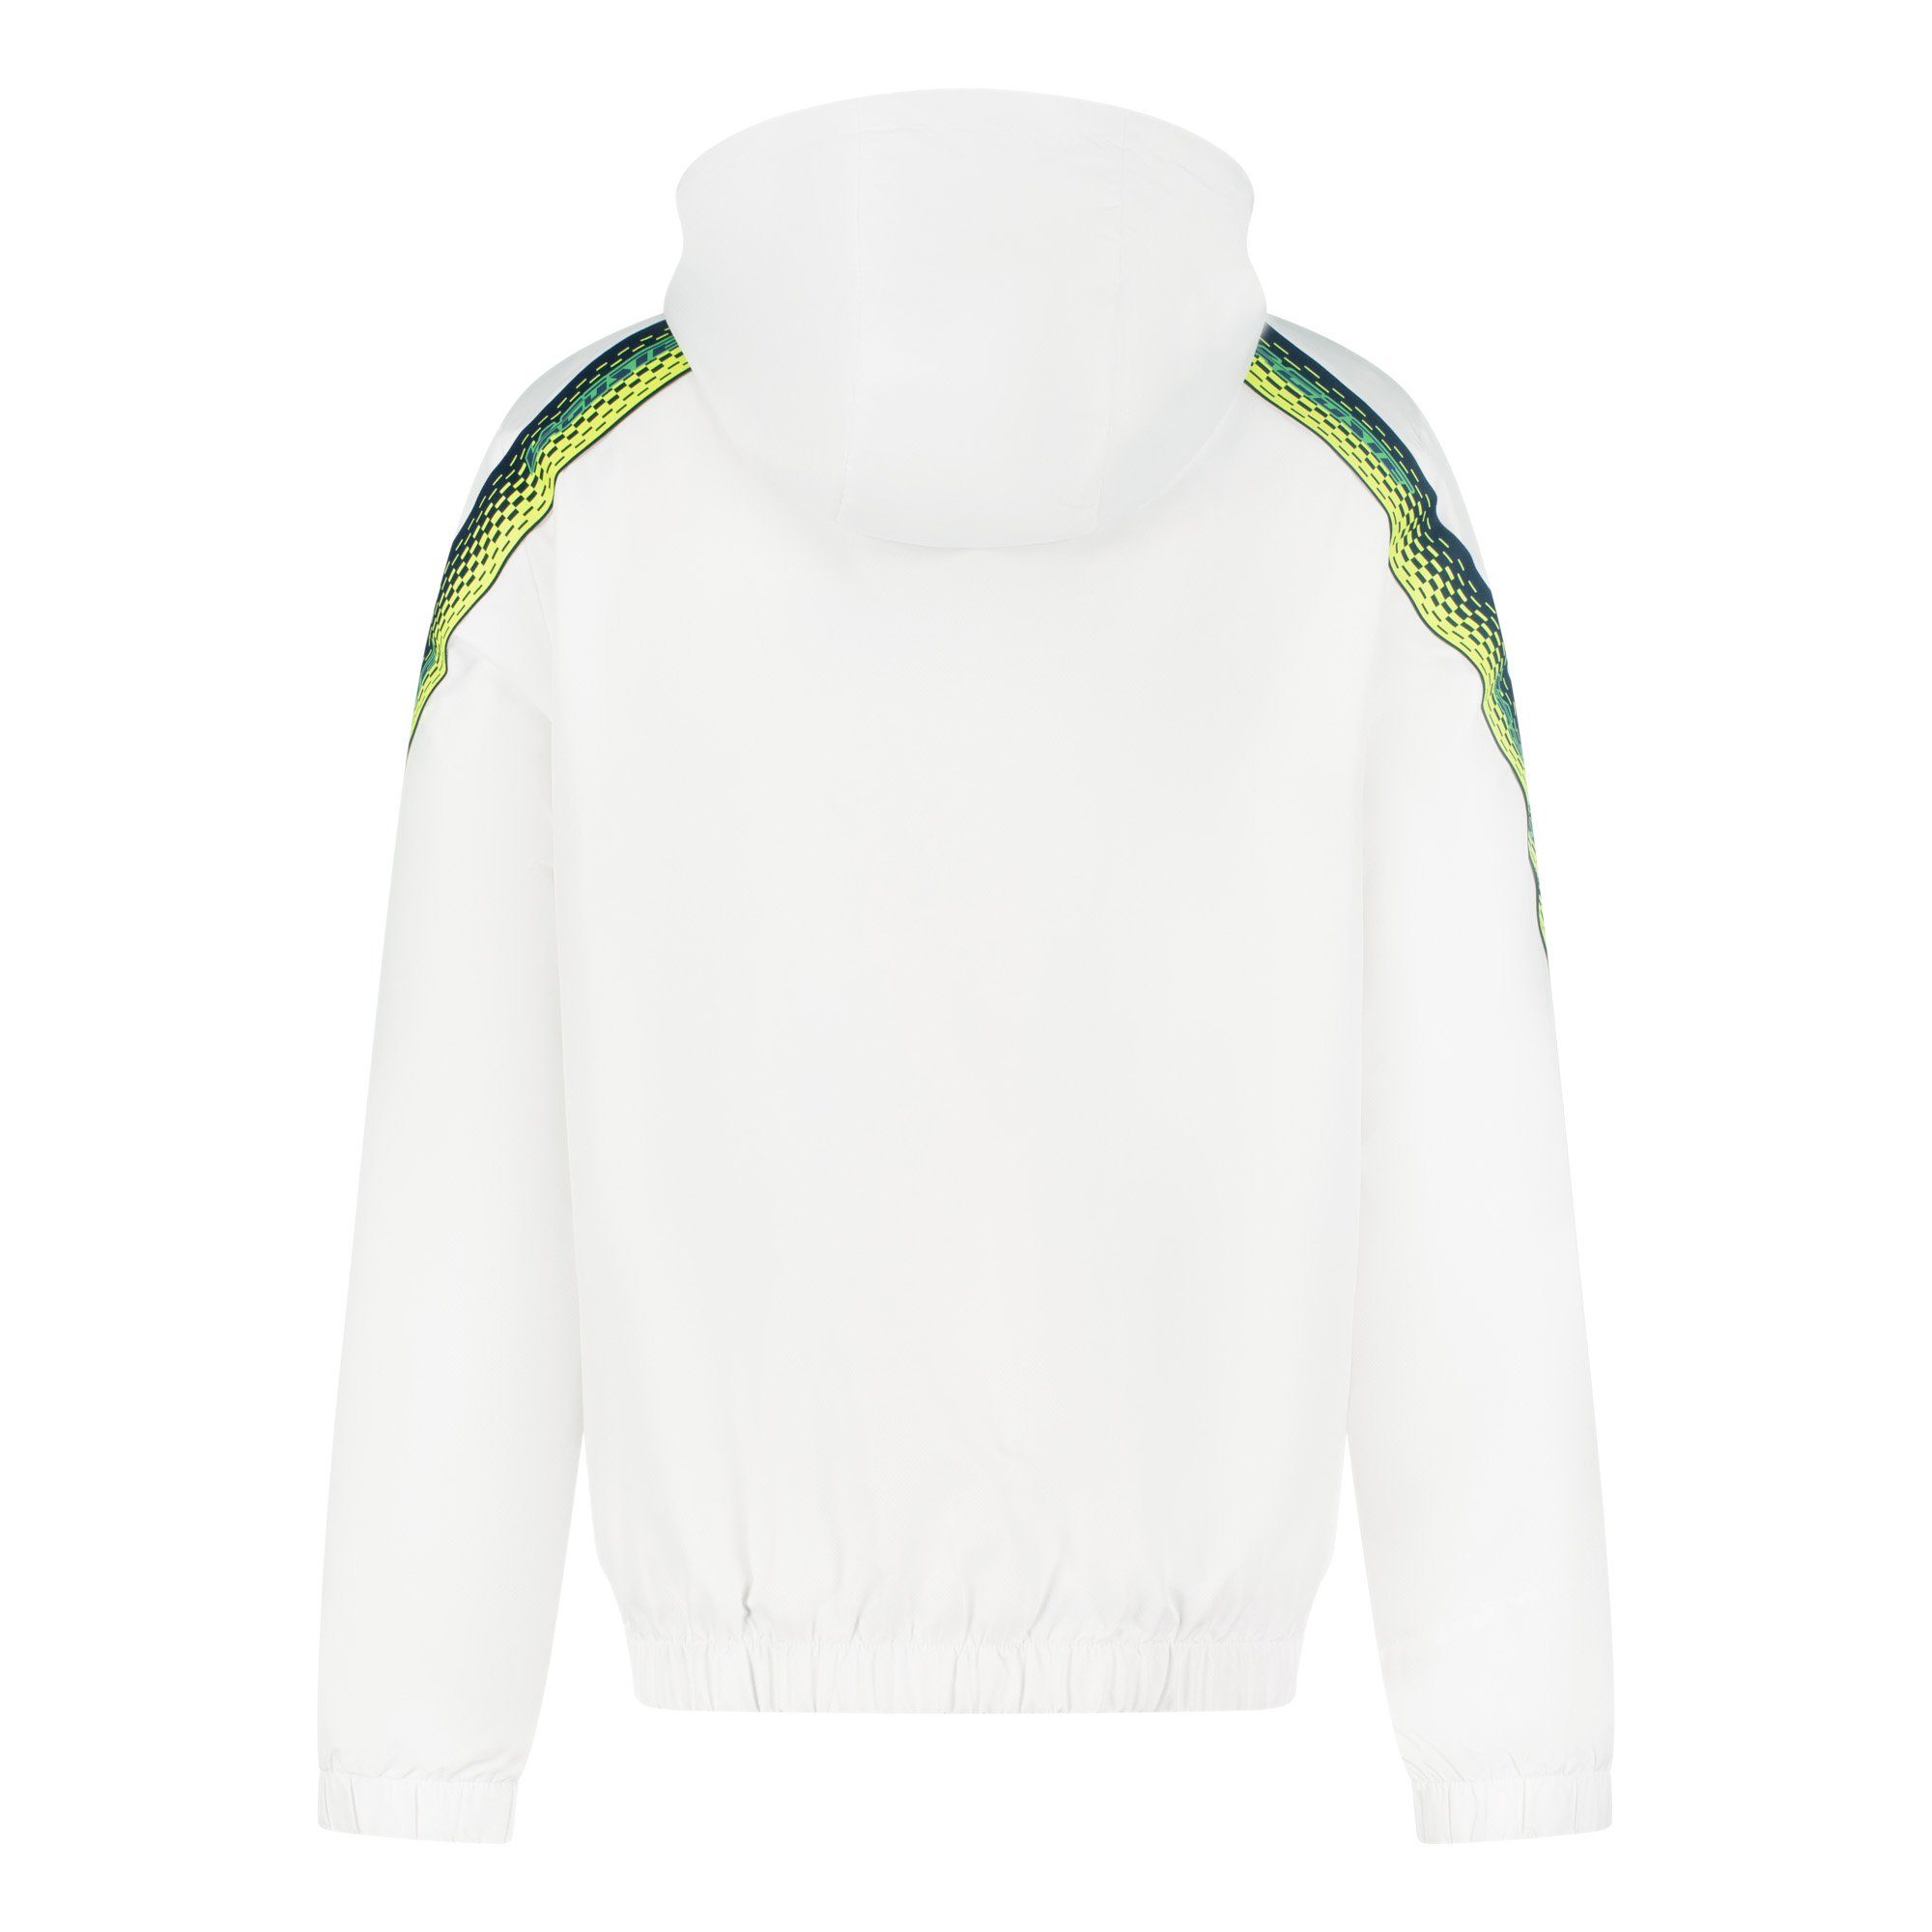 Lacoste Funktionsjacke WHITE/NAVY BLUE-ELECTRIC (X1I) YELLOW